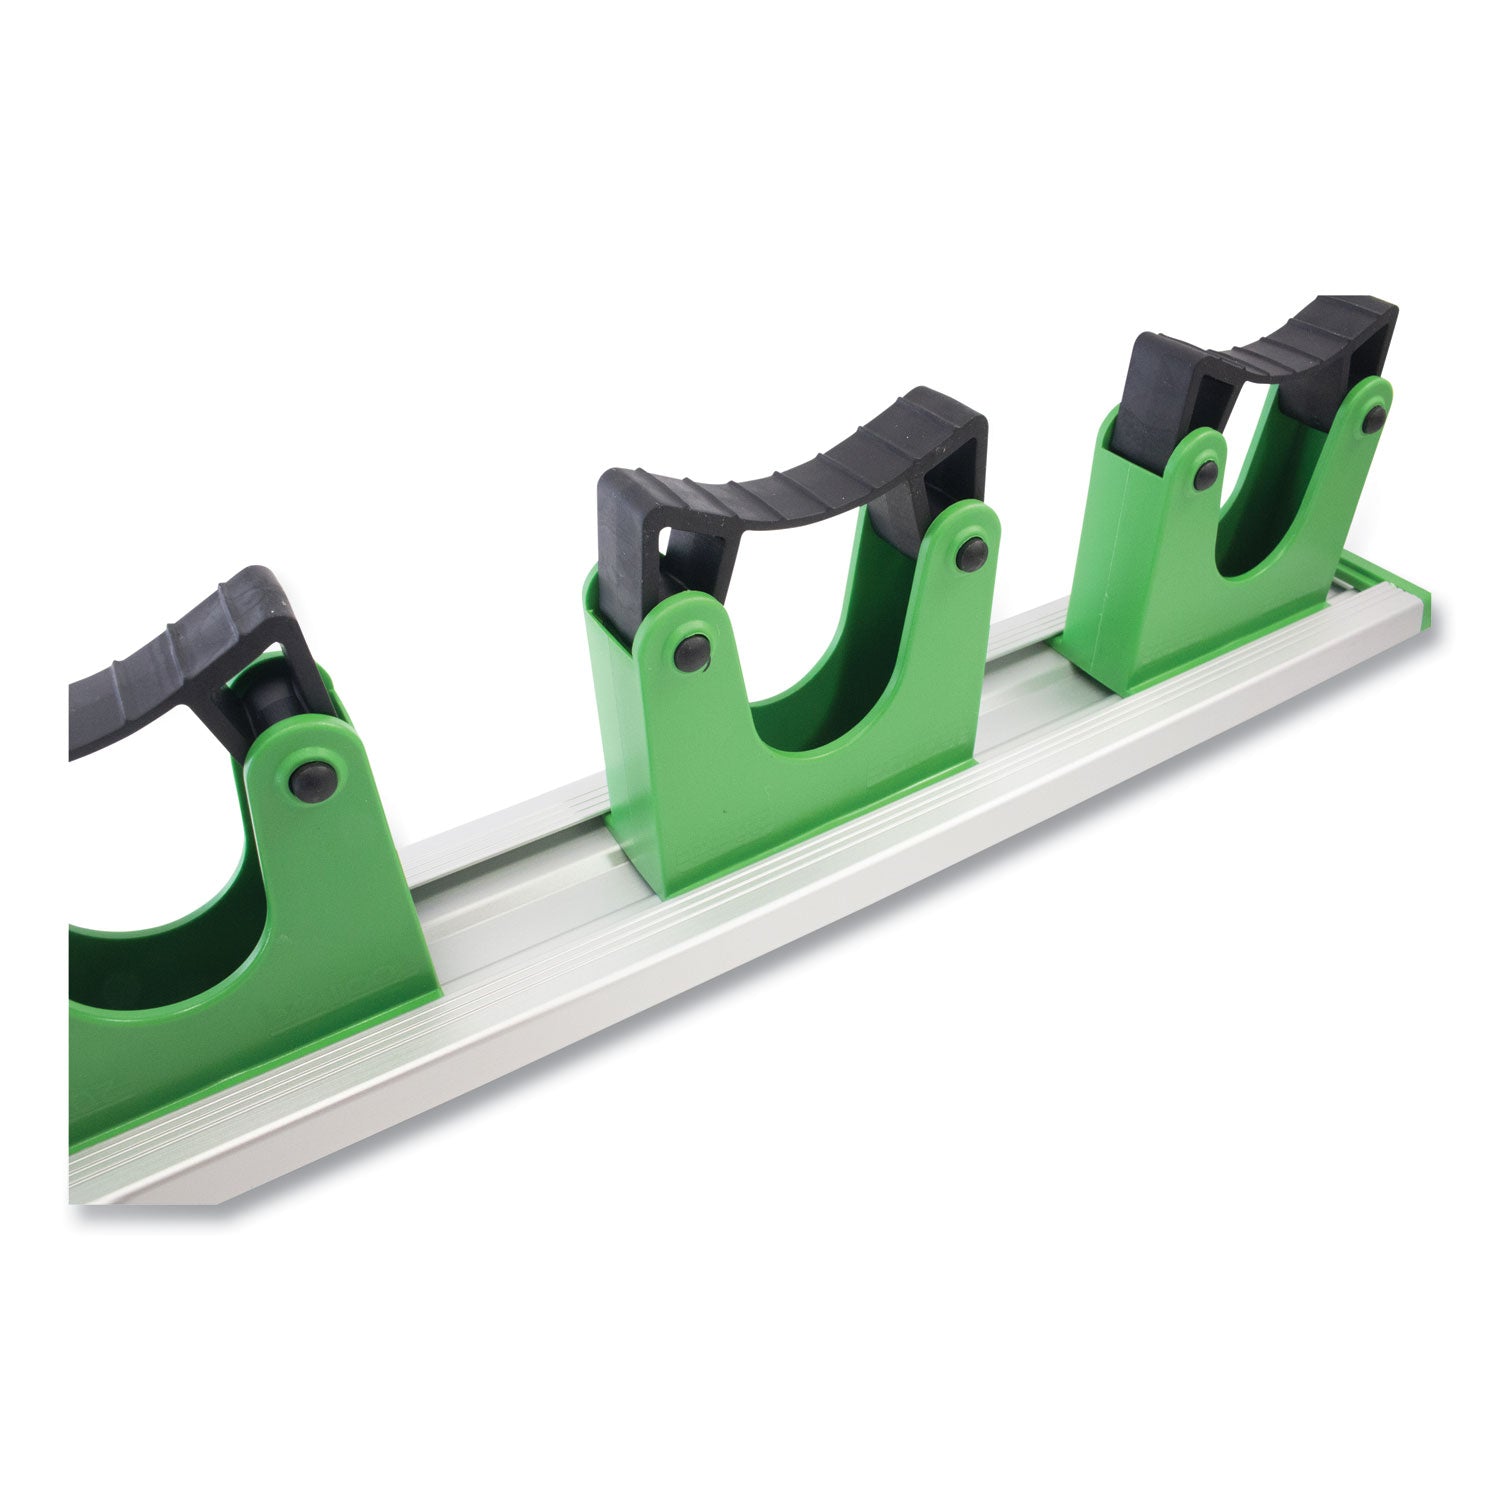 hang-up-cleaning-tool-holder-28w-x-315d-x-217h-silver-green_ungho700ea - 2